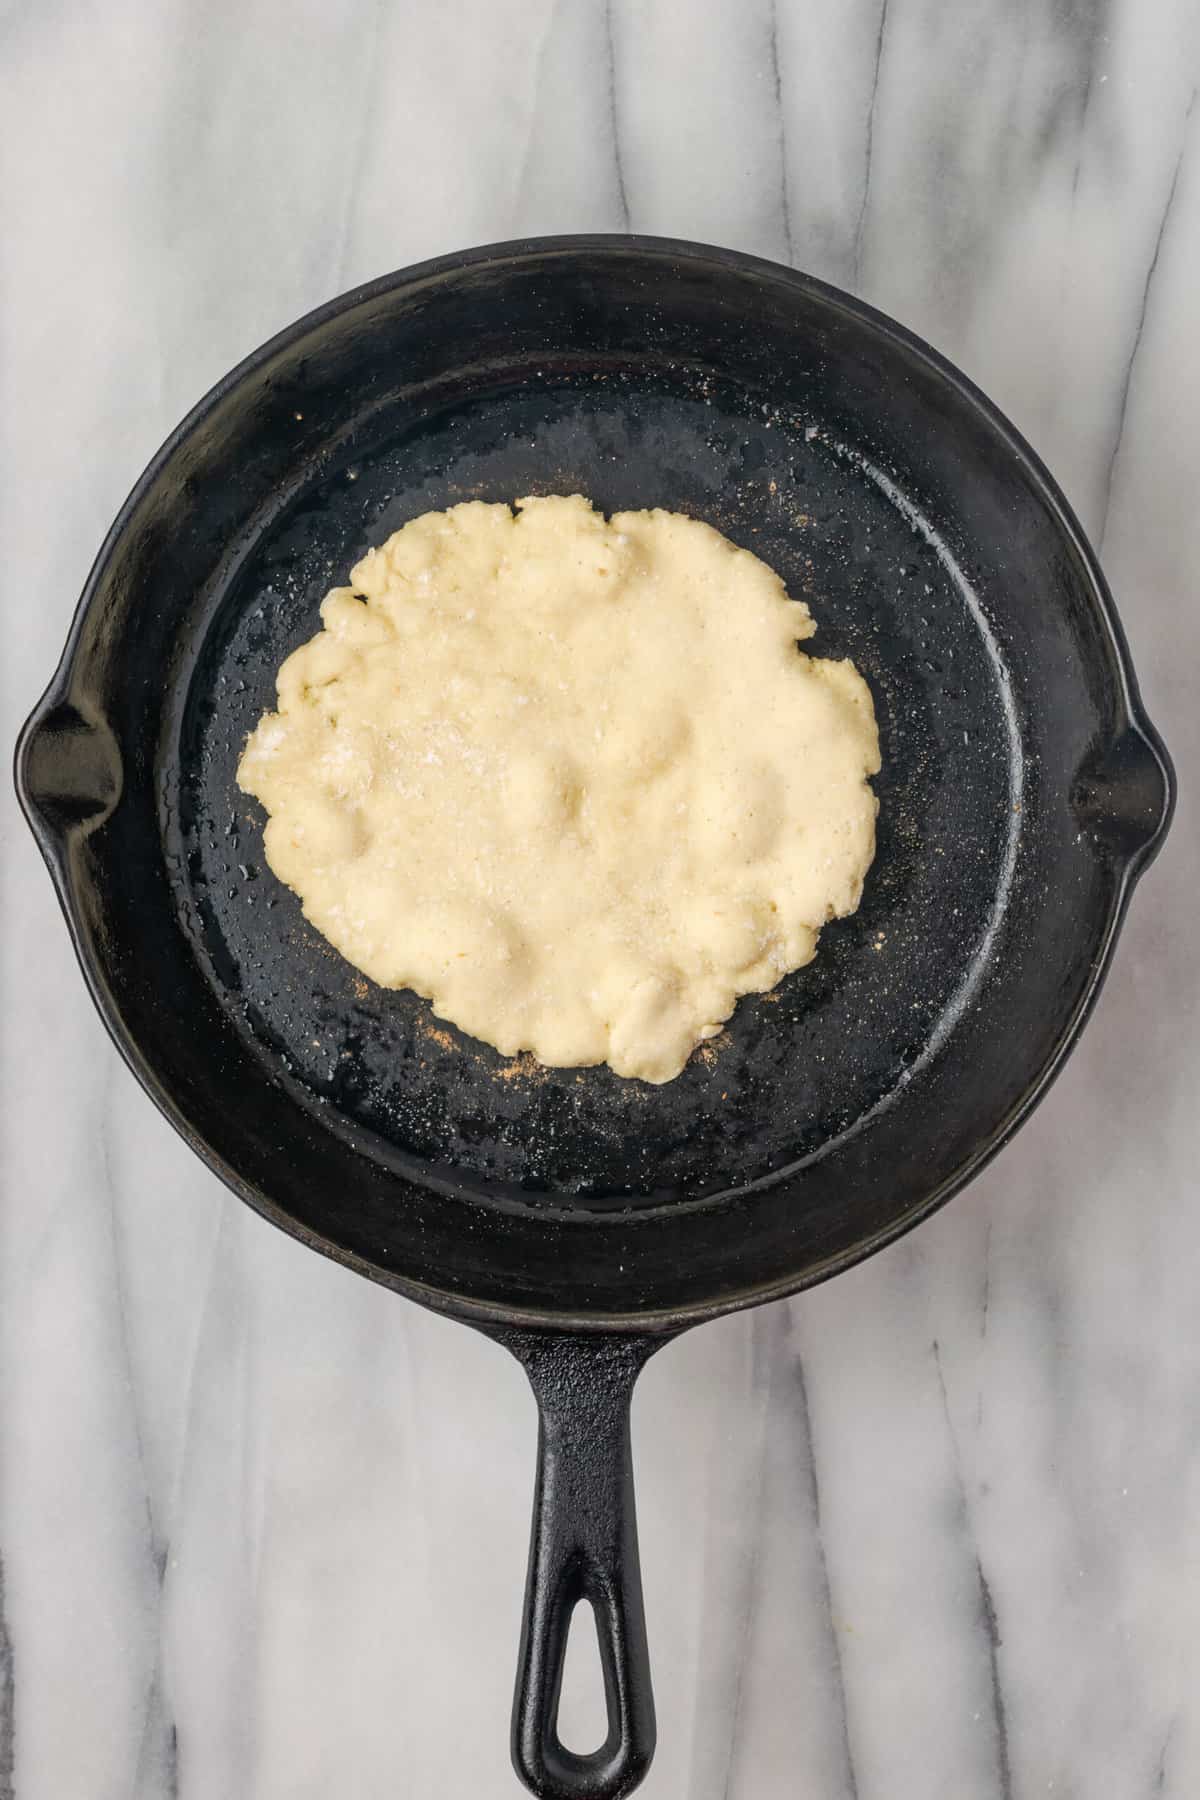 A piece of naan cooks in cast iron skillet.